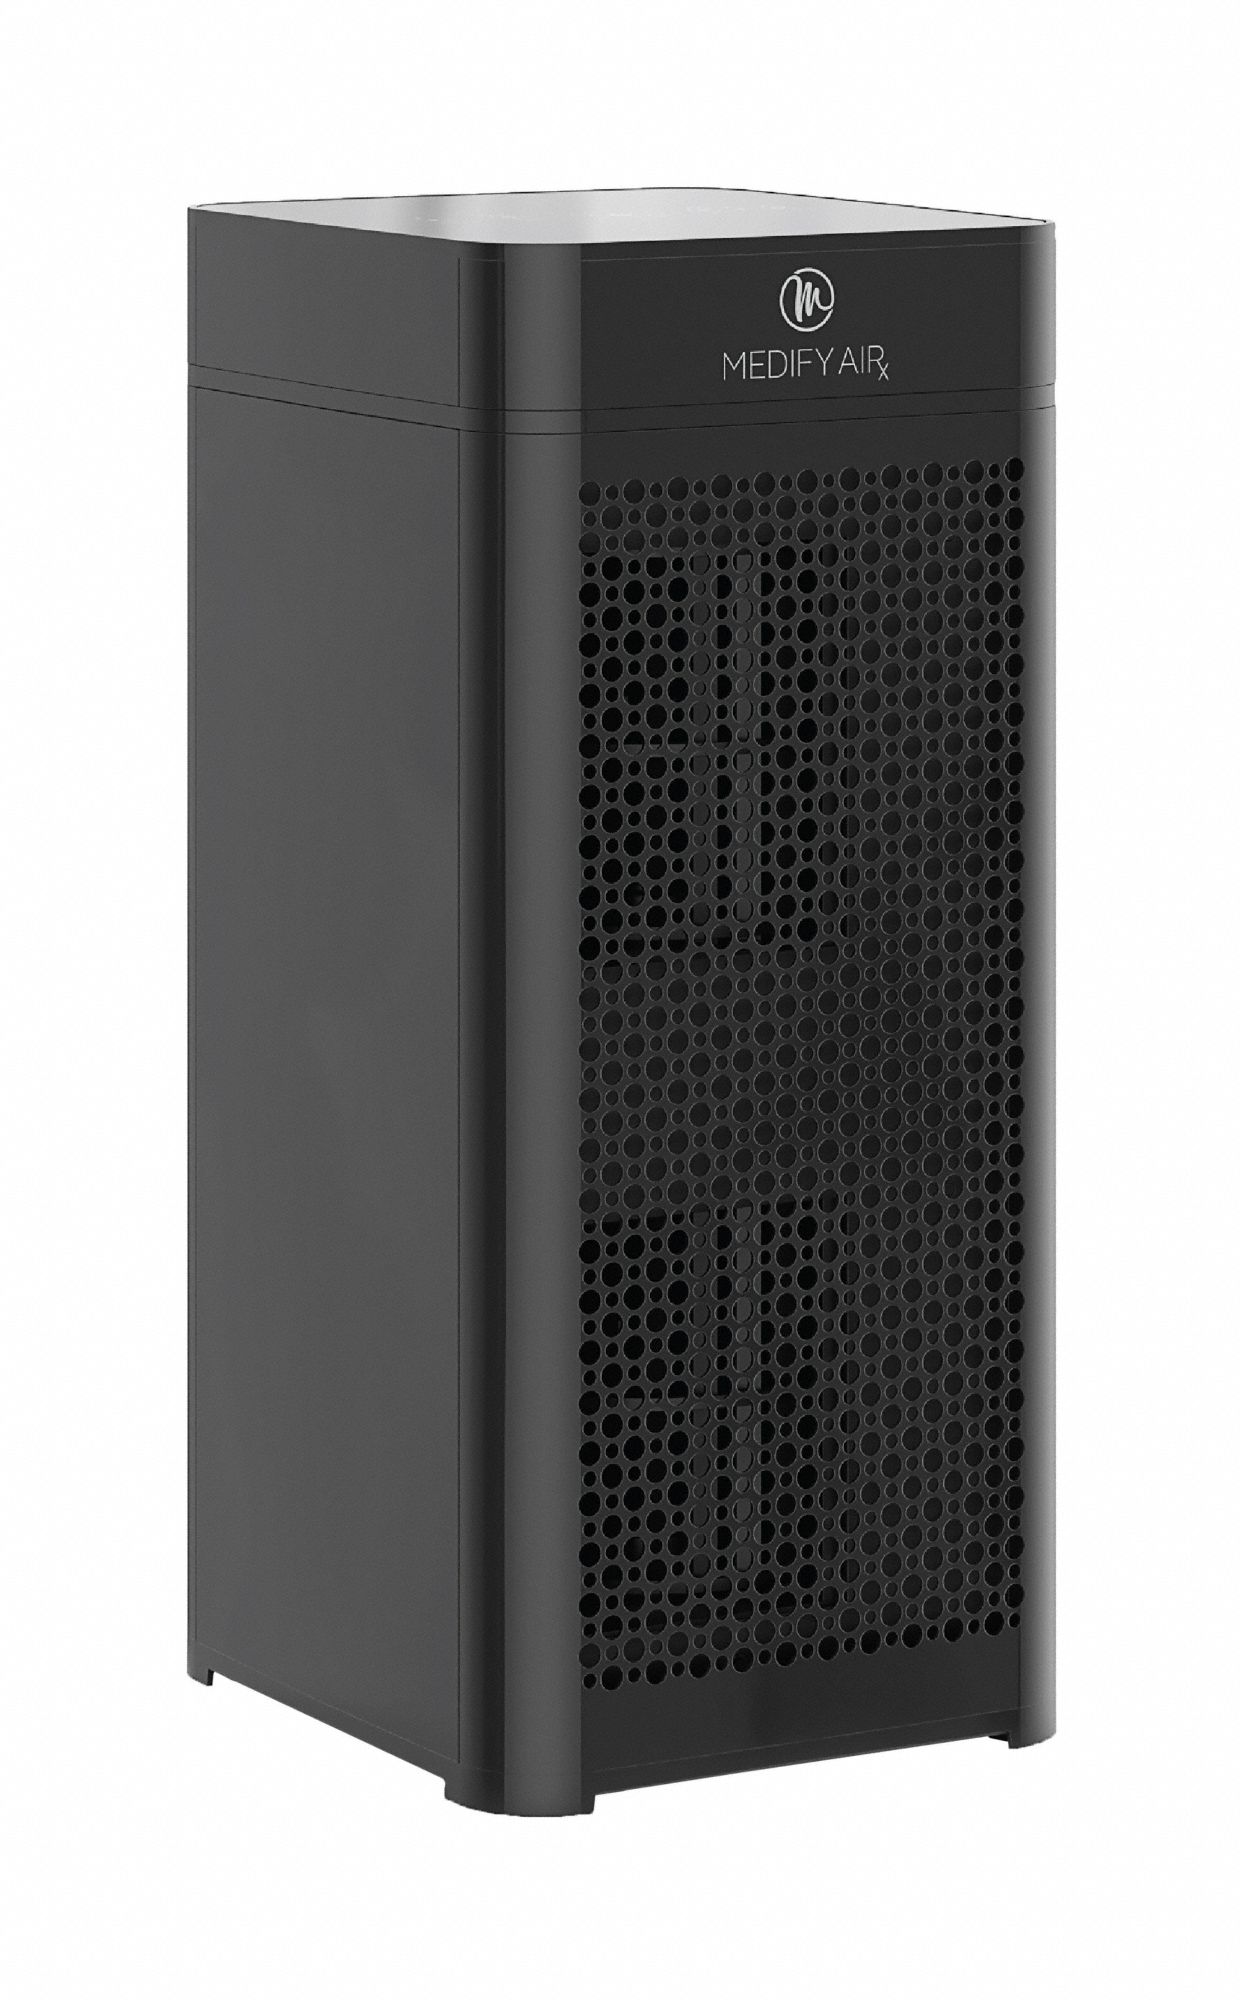 Air Purification MA-40 black: Child Lock, Timer, On/Off, Fan Speed, Sleep Mode, Greater than 60 dB